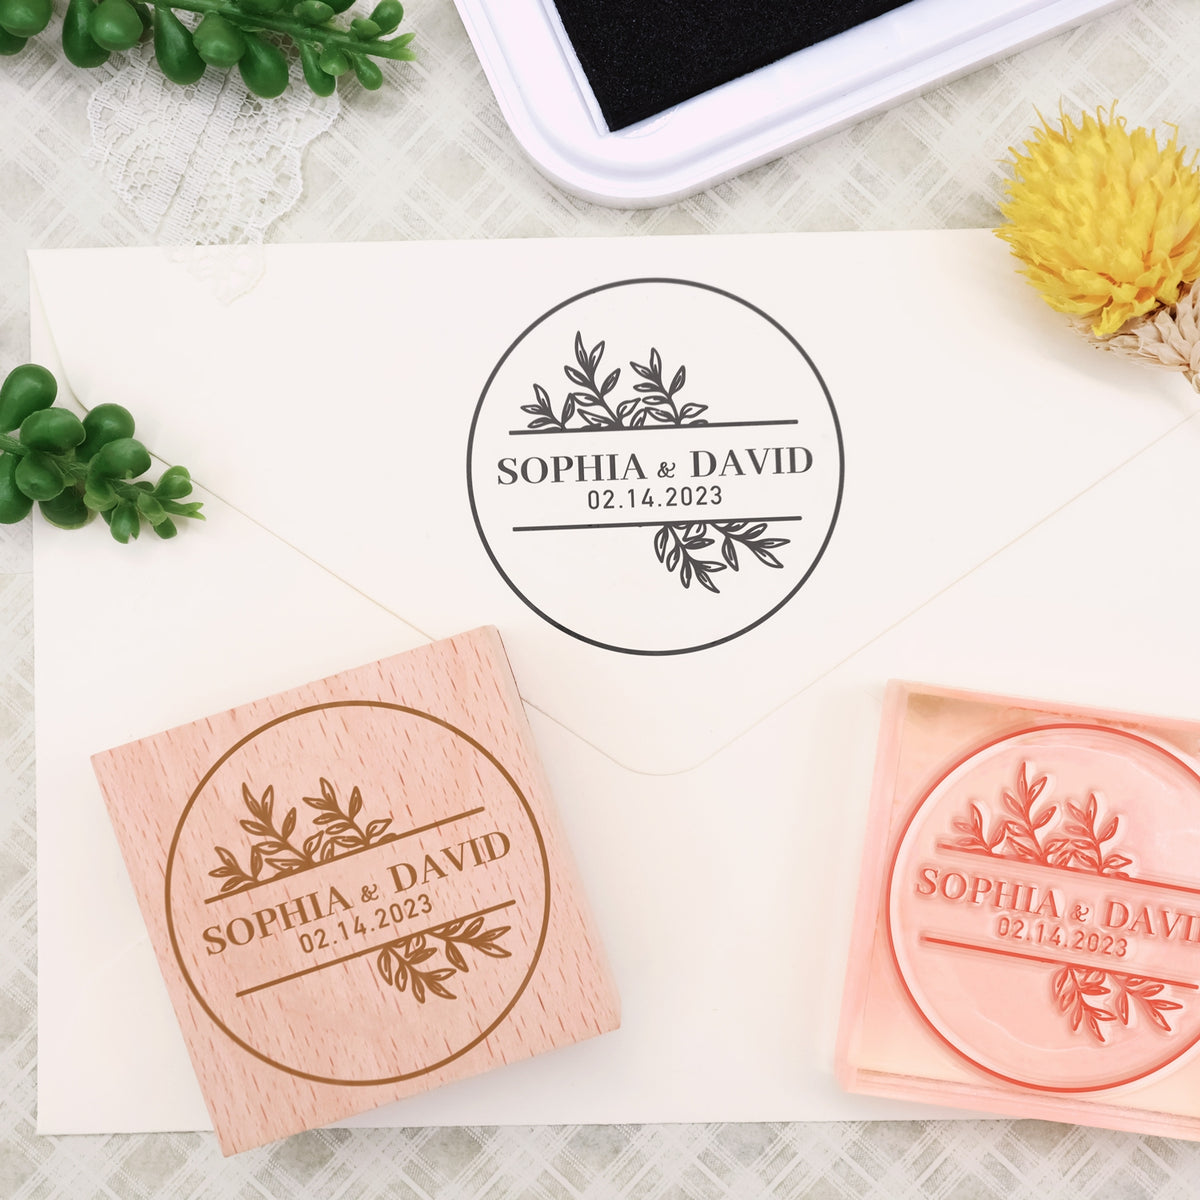 Vellum Gold Flake Wax Seal Stickers, Pack of 10 Wax Seals by Eva Tadros